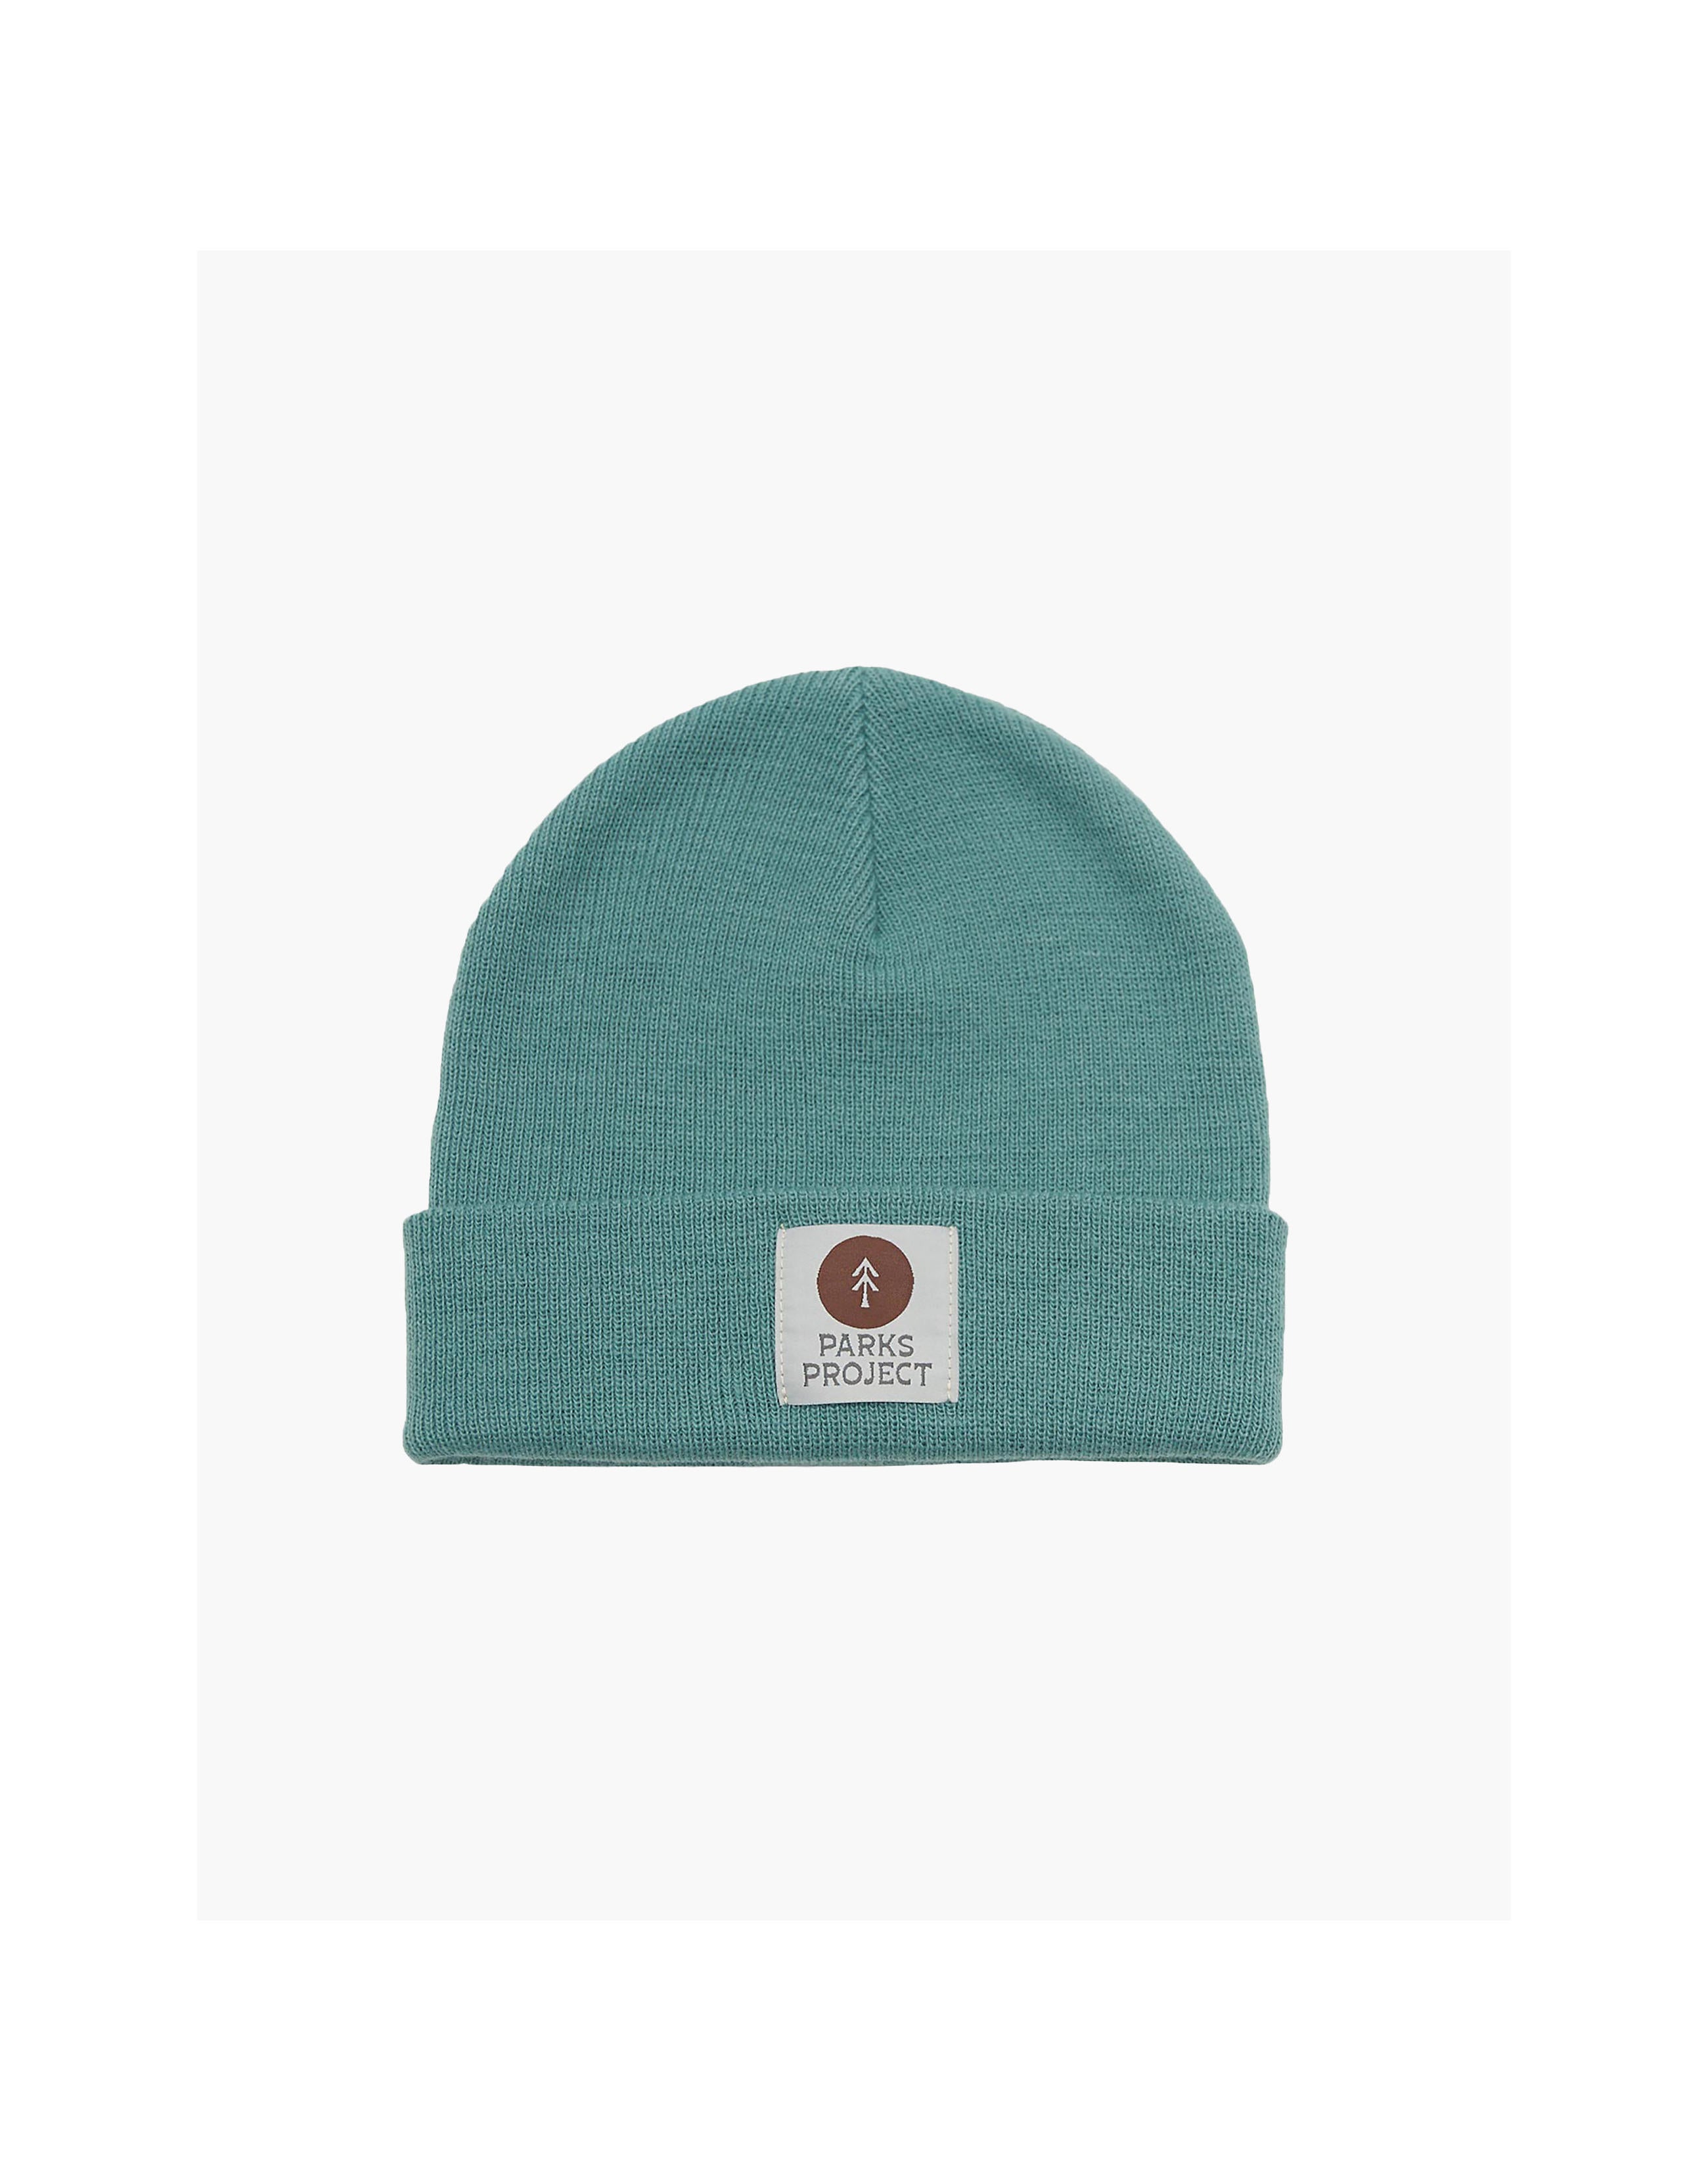 Parks Project + Trail Crew Beanie in Sea Green